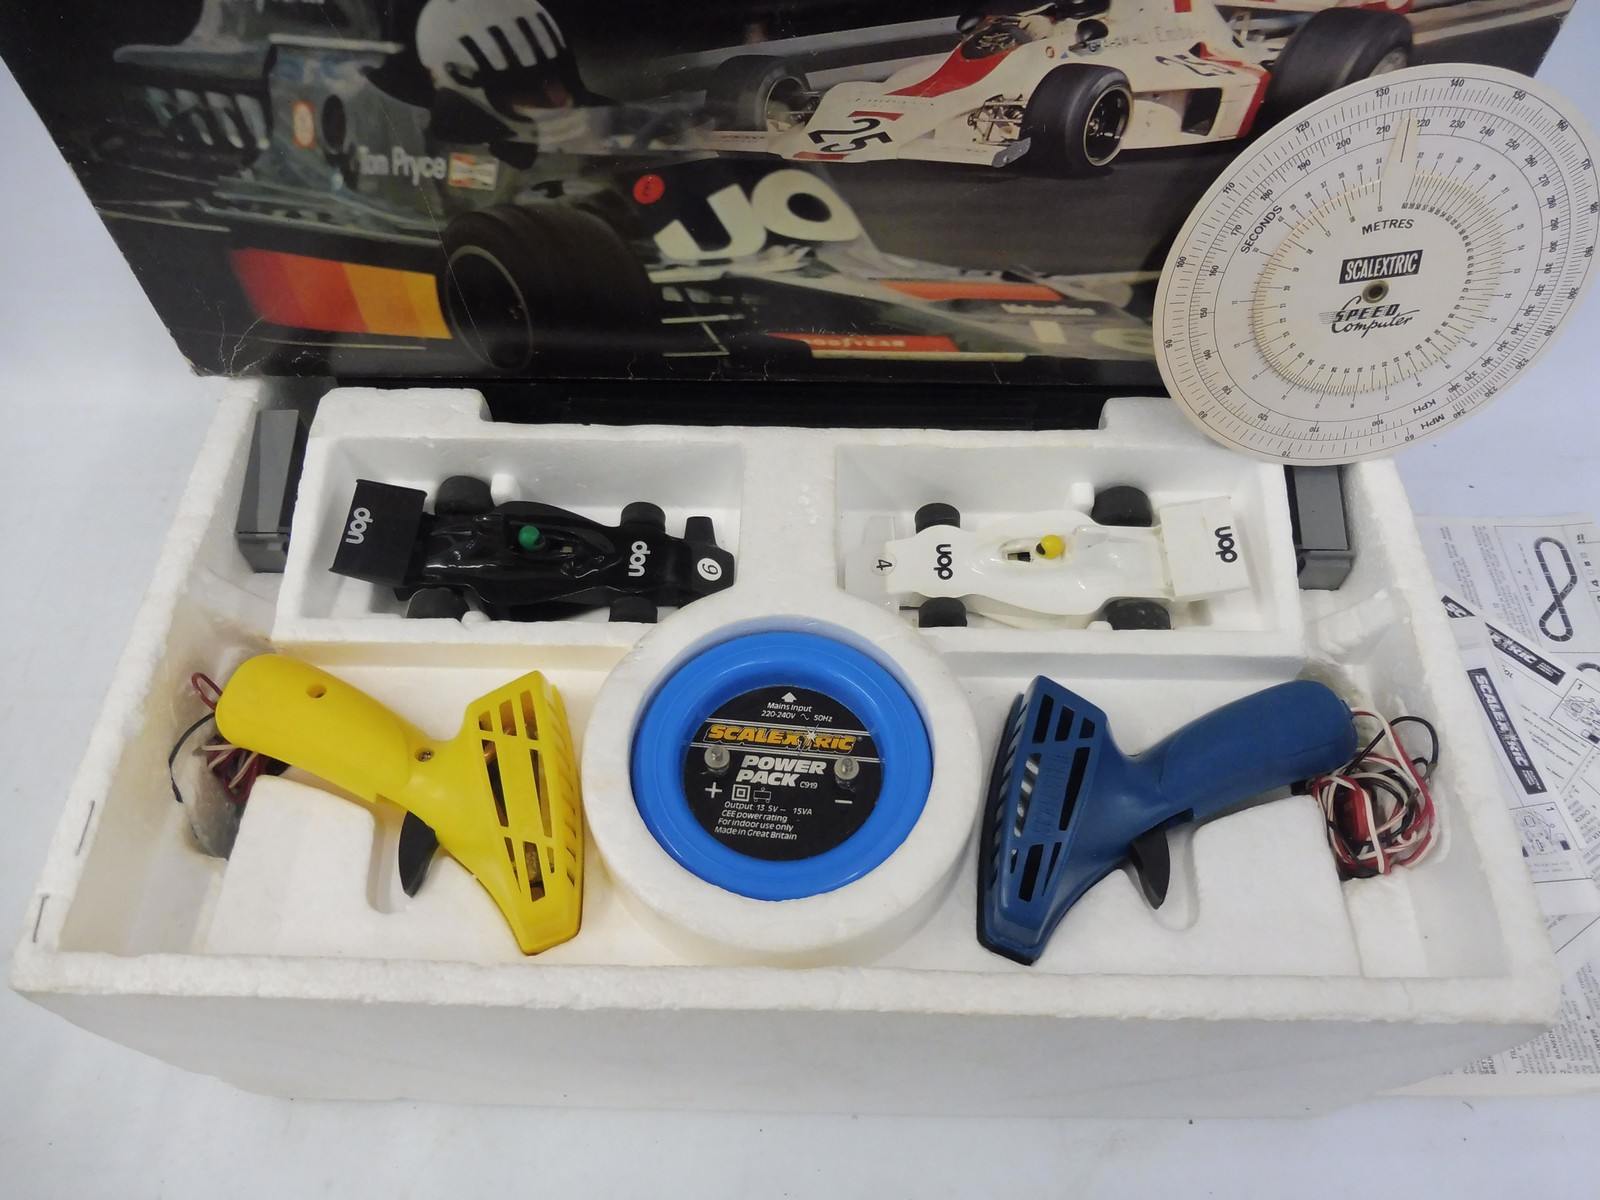 A Scalextric 200, appears complete and in very nice condition, plus an extra car, a Ferrari 312. - Image 2 of 5